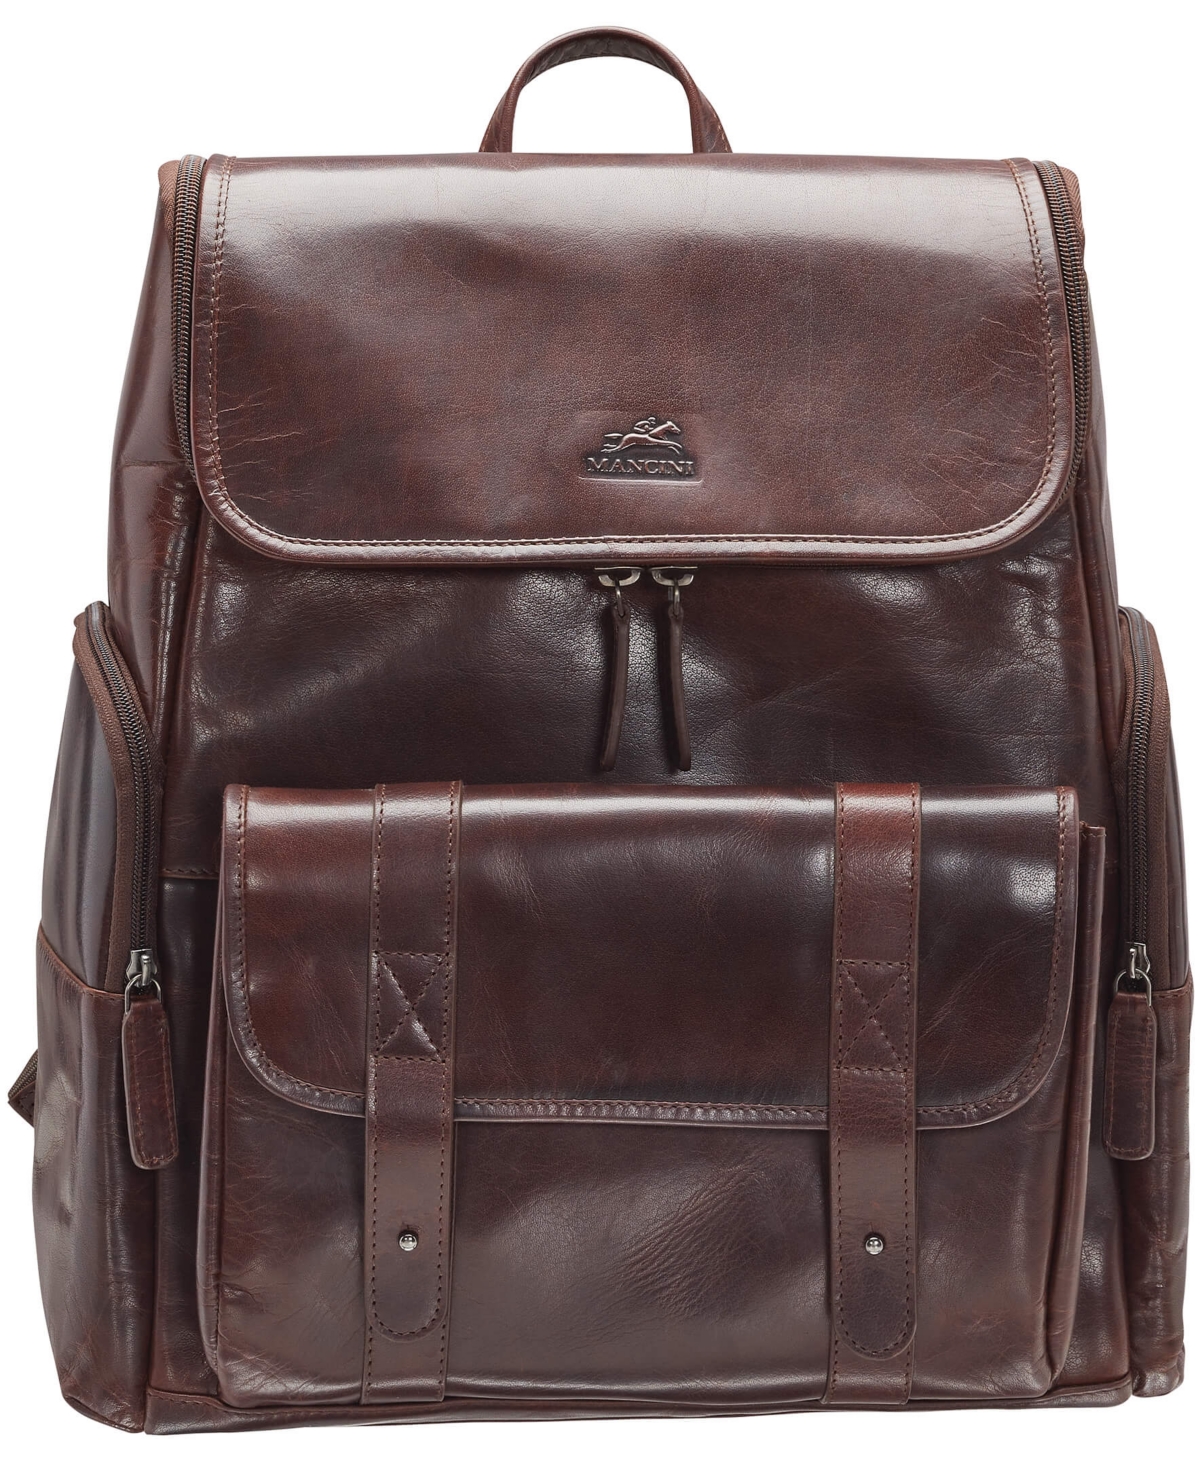 Men's Buffalo Backpack with Zippered Laptop, Tablet Compartment - Brown